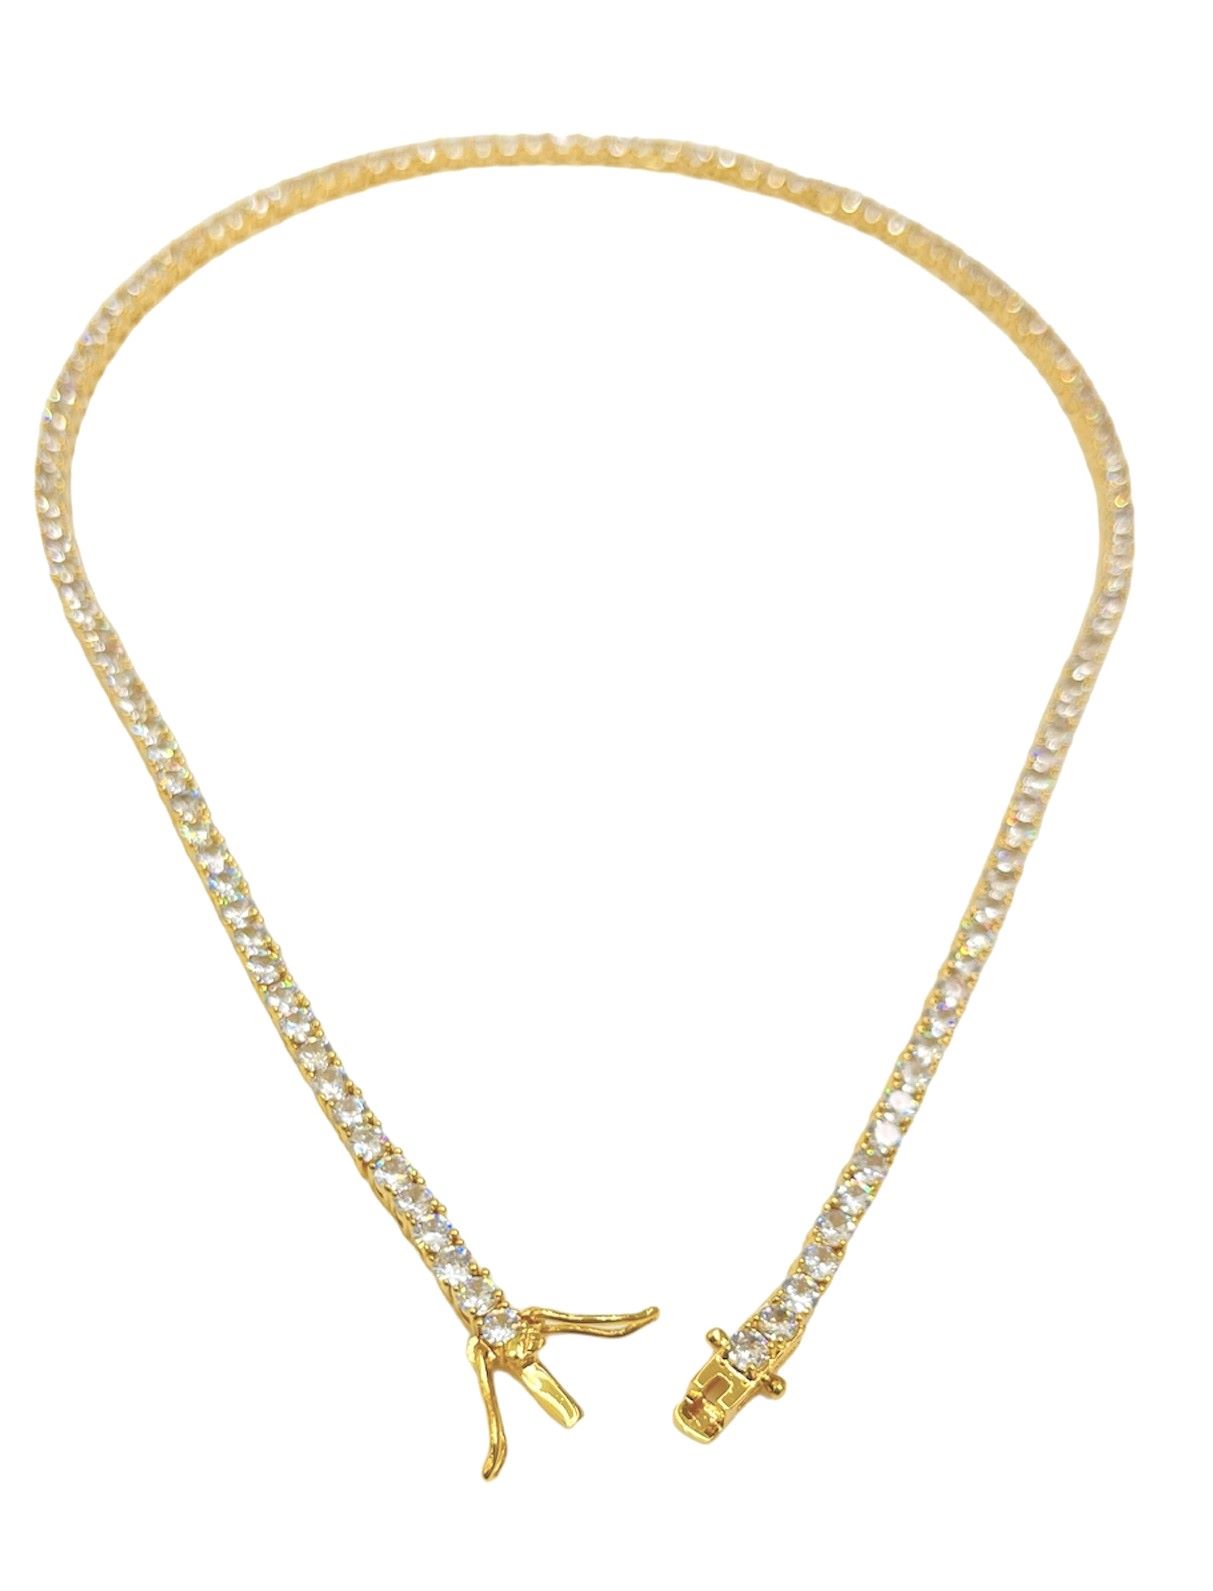 TENNIS 3MM ZIRCON NECKLACE GOLD PLATED